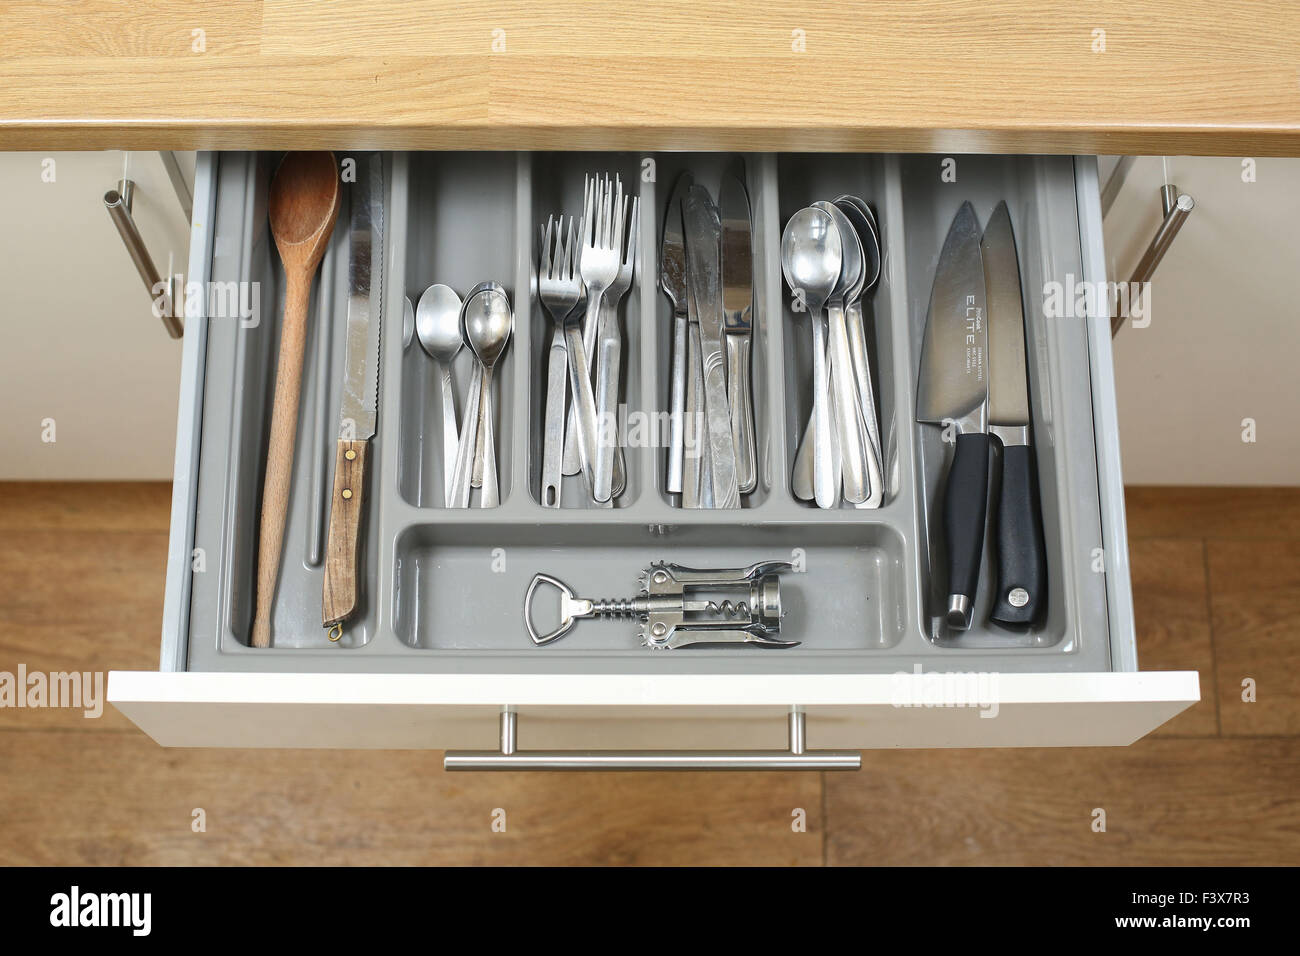 A kitchen drawer full of all the cutlery, knives and utensils needed to cook up a storm. Stock Photo